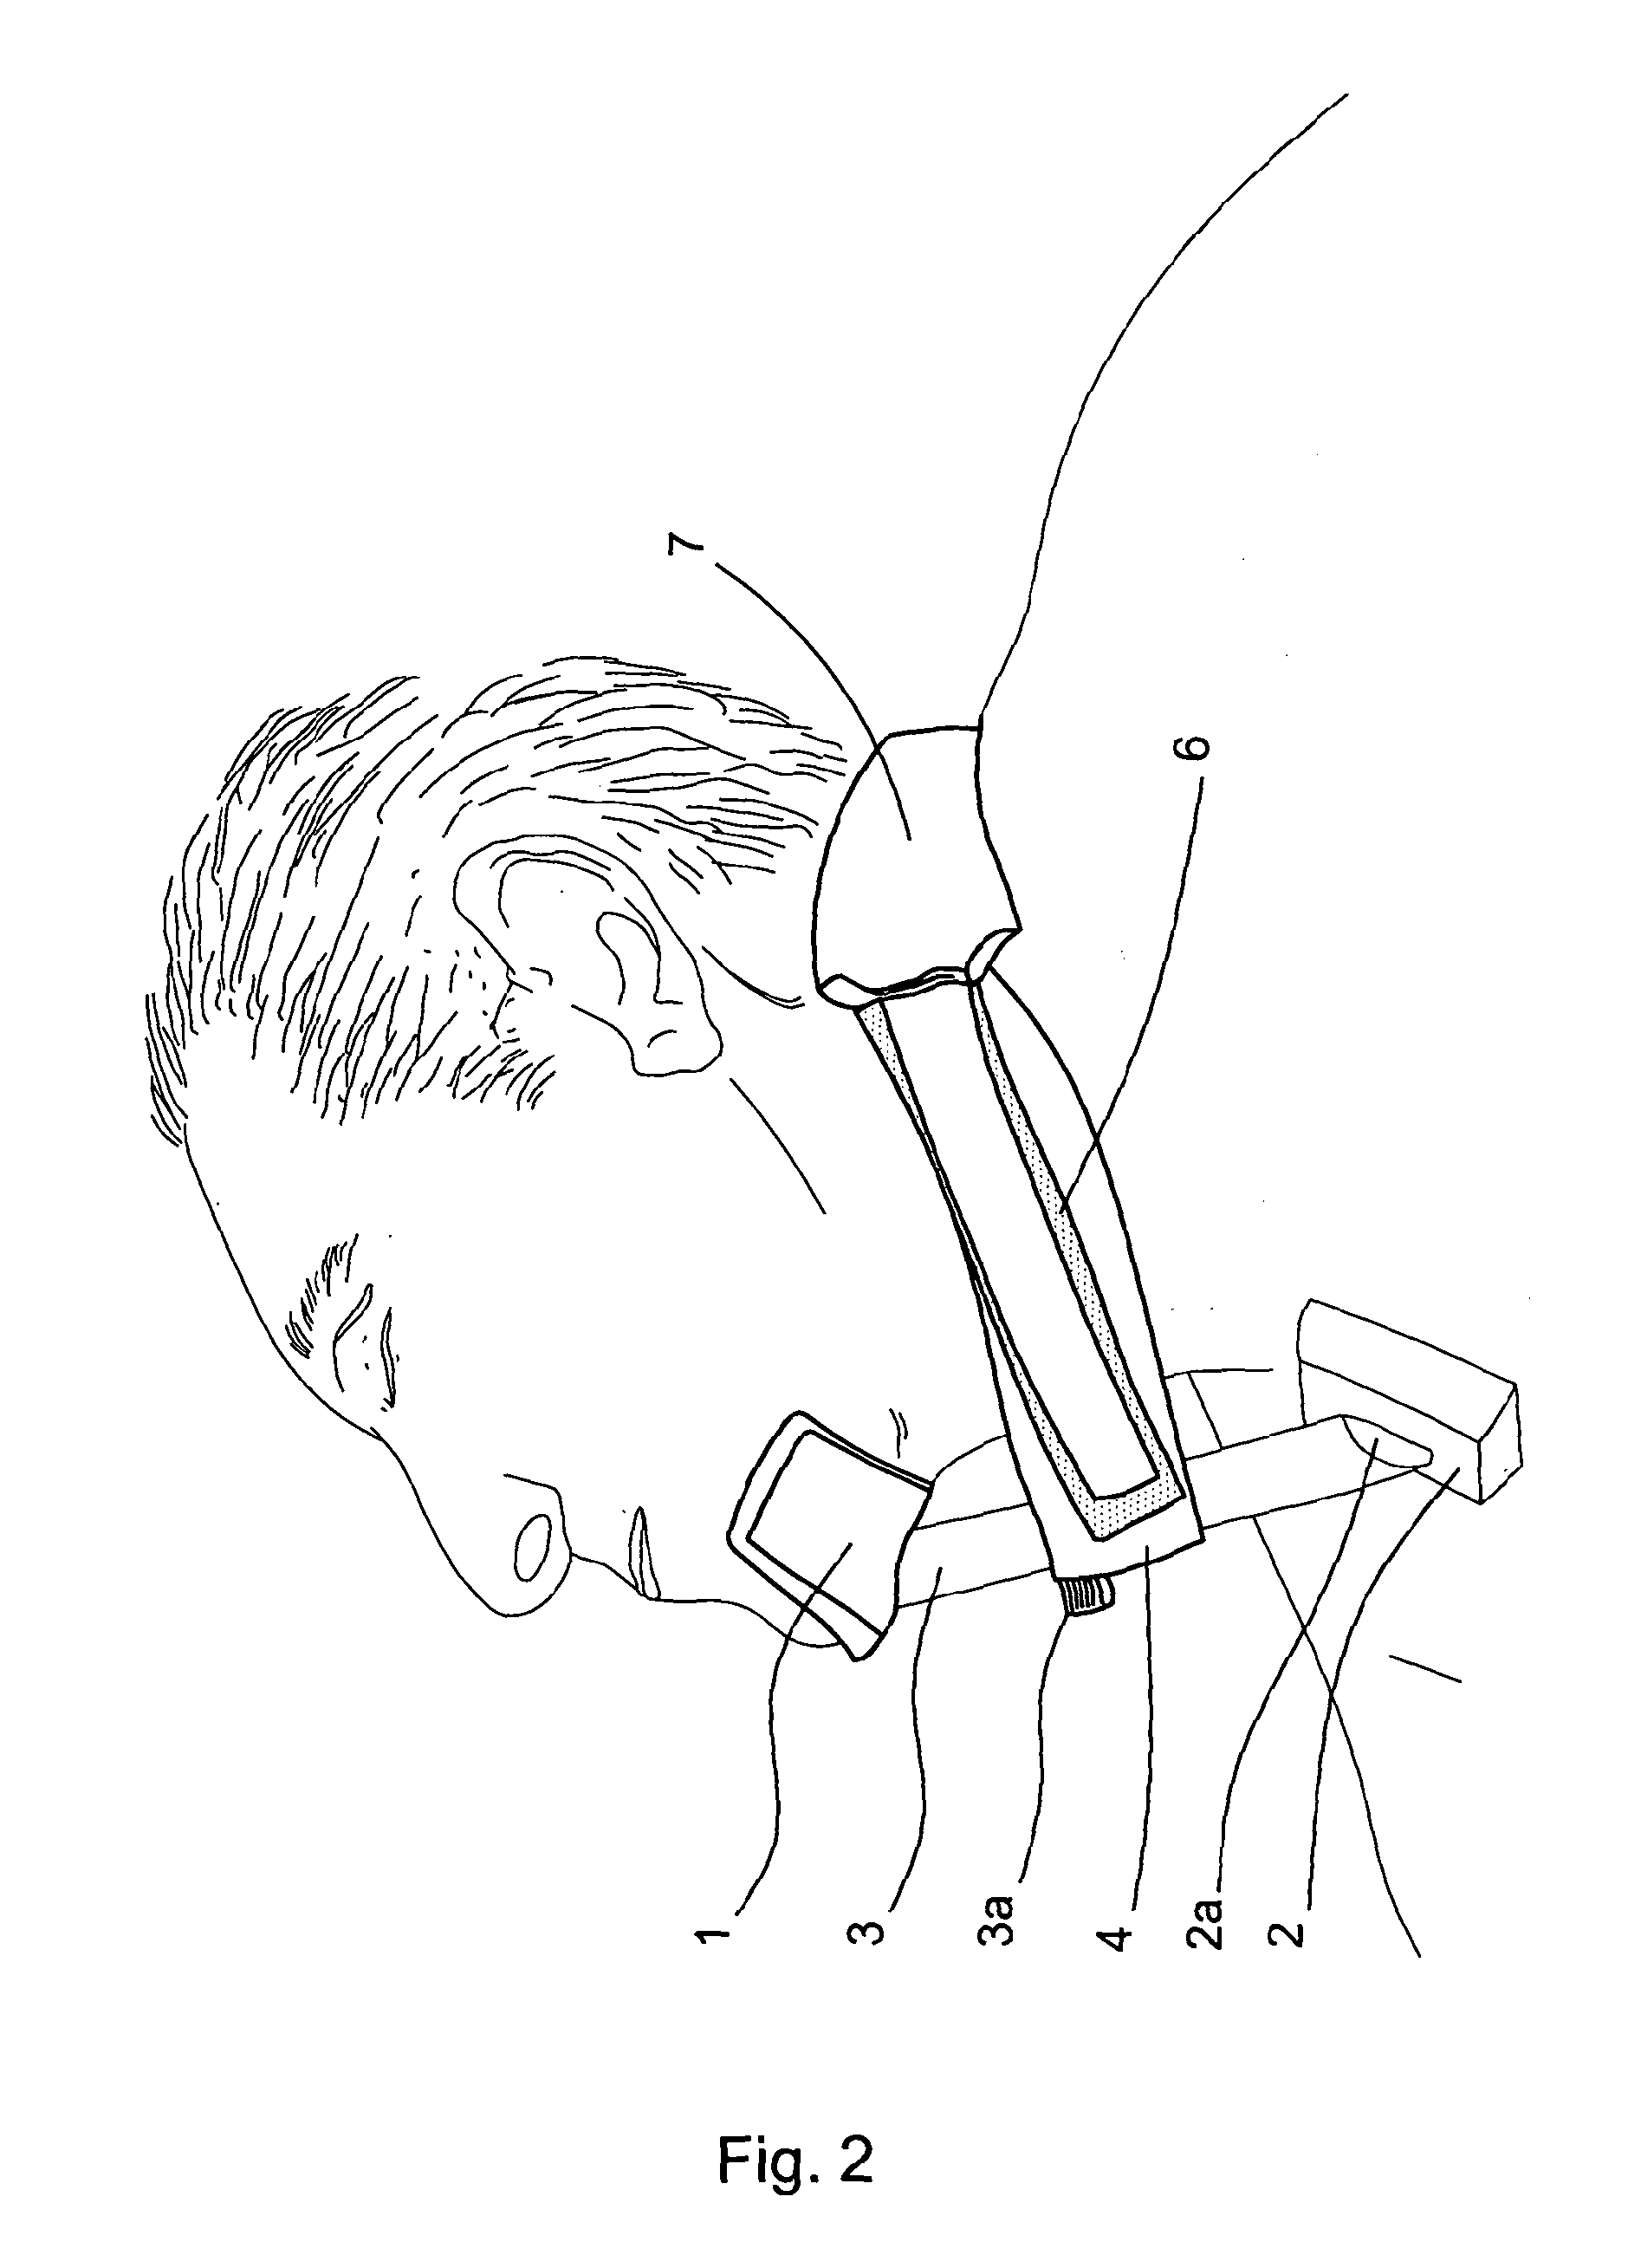 Chin and neck support device